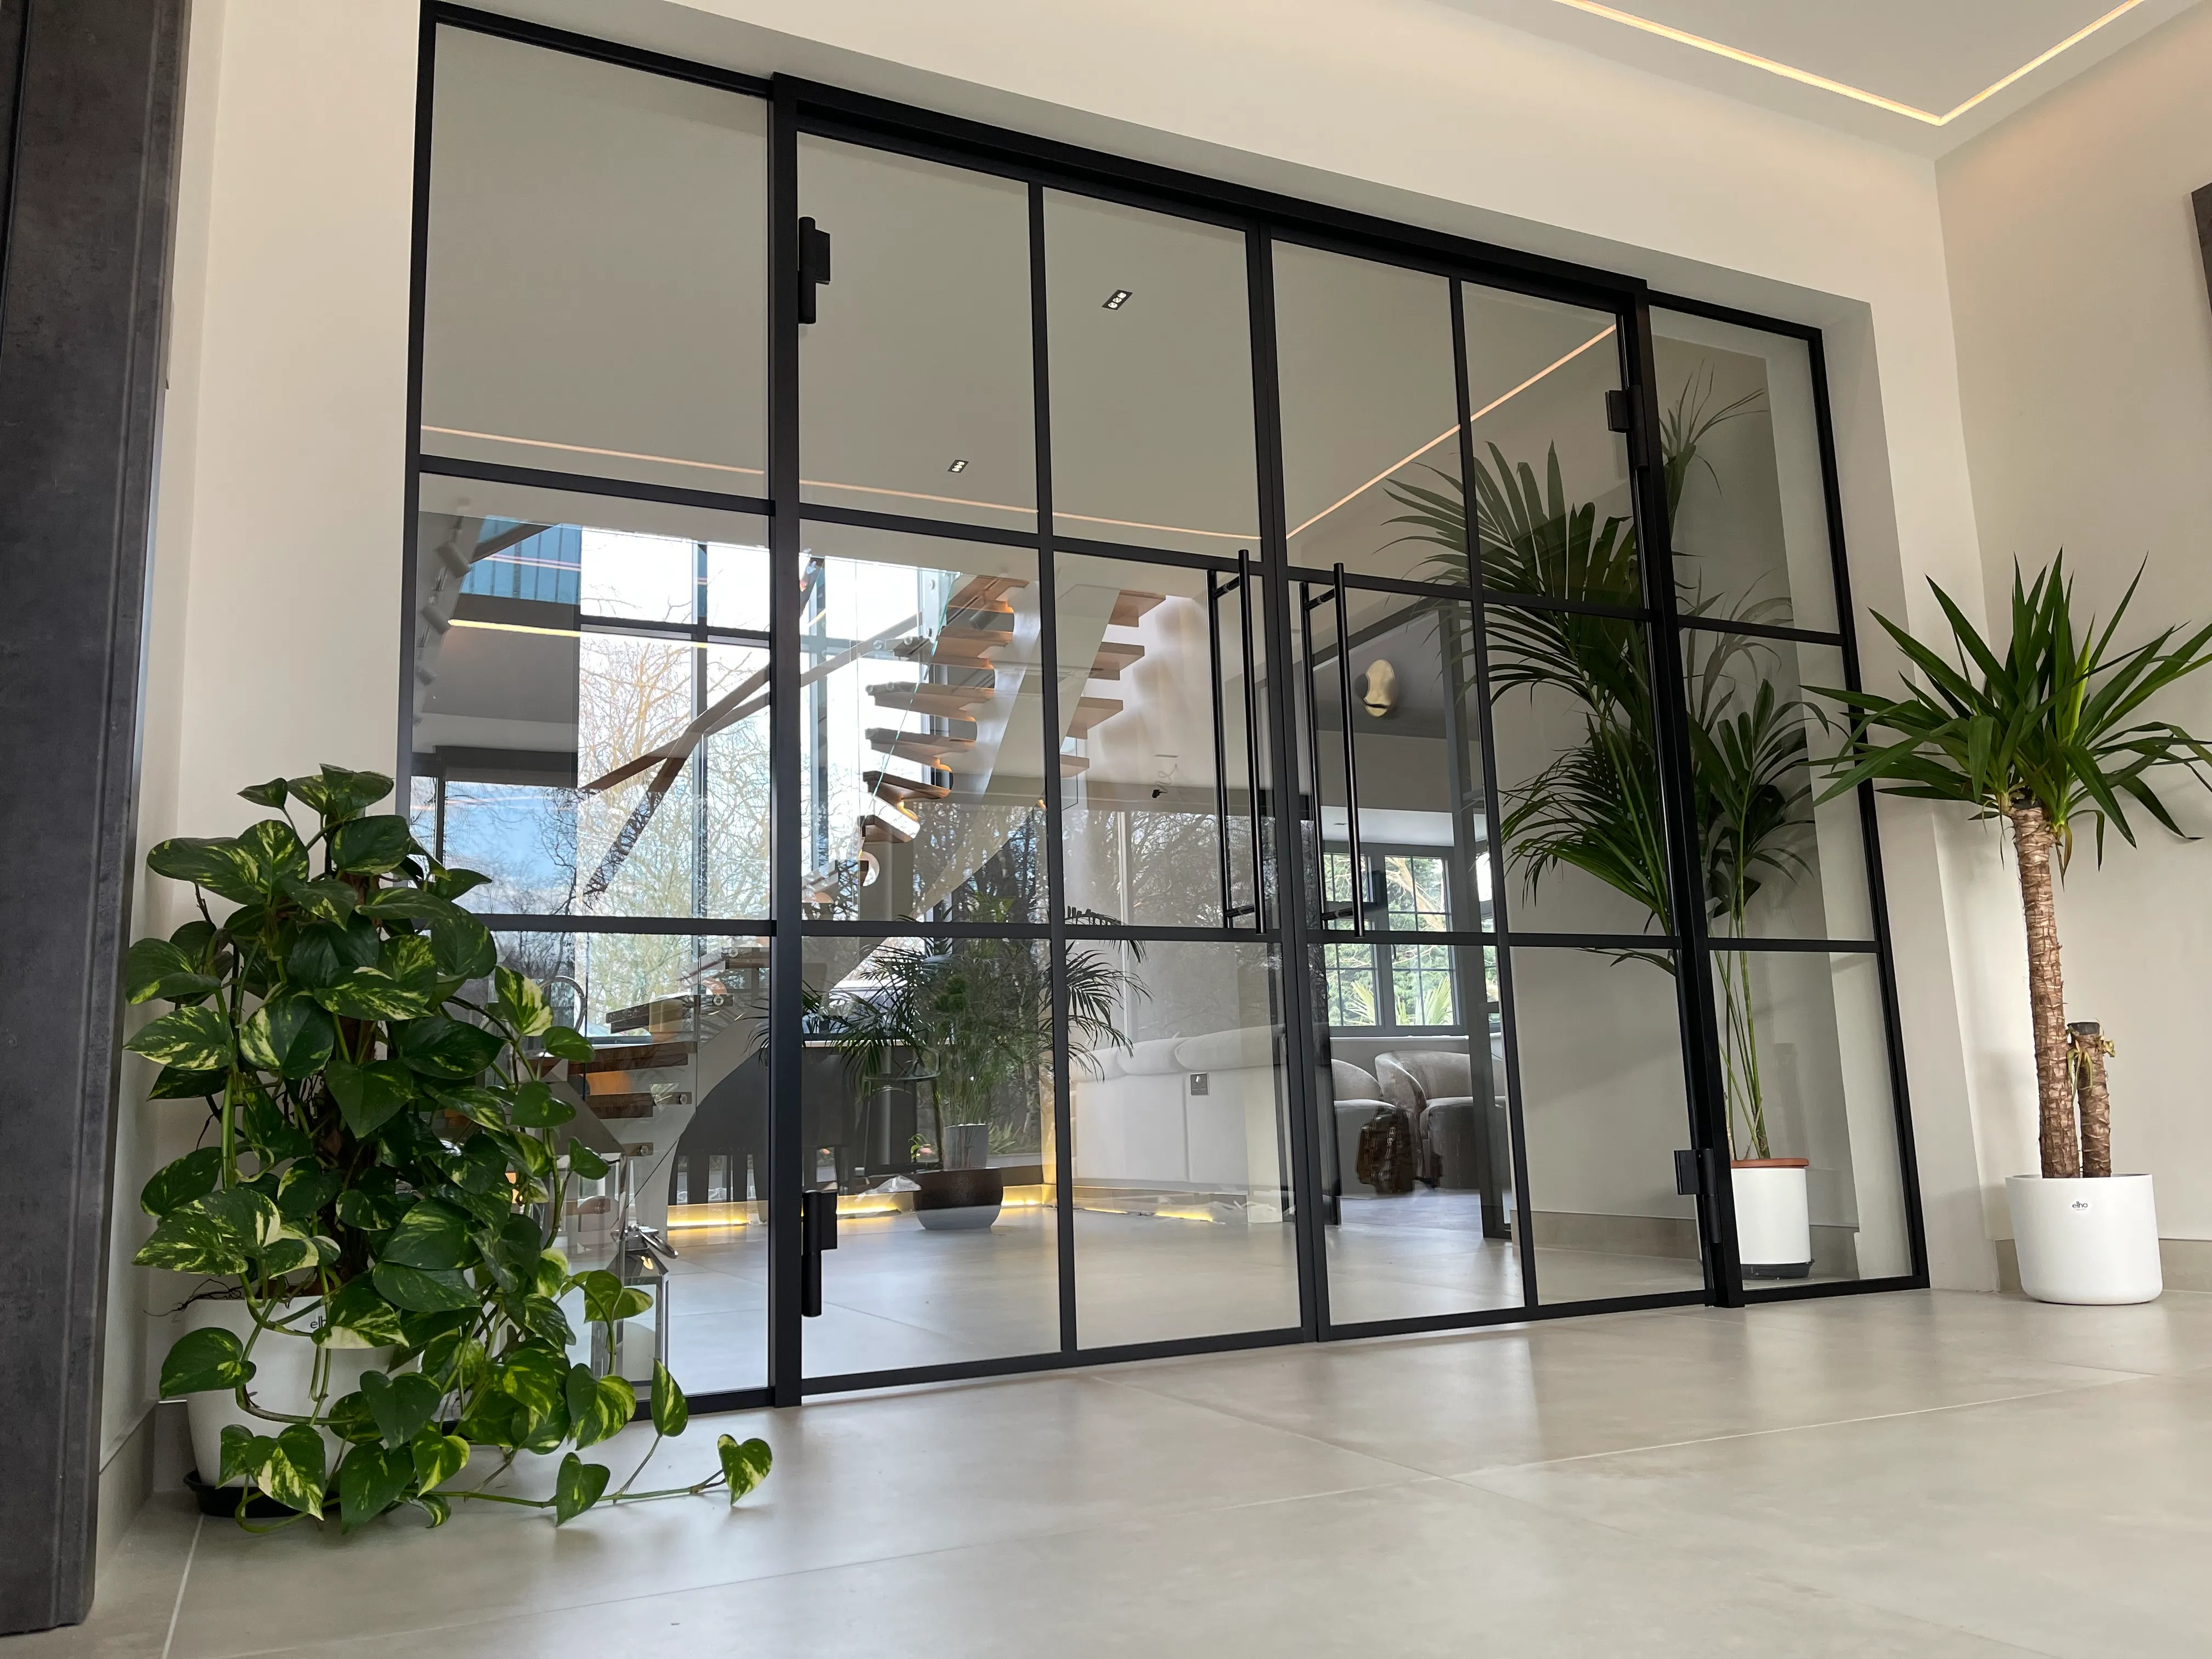 Office breakout and reception area with black framed glass partitions